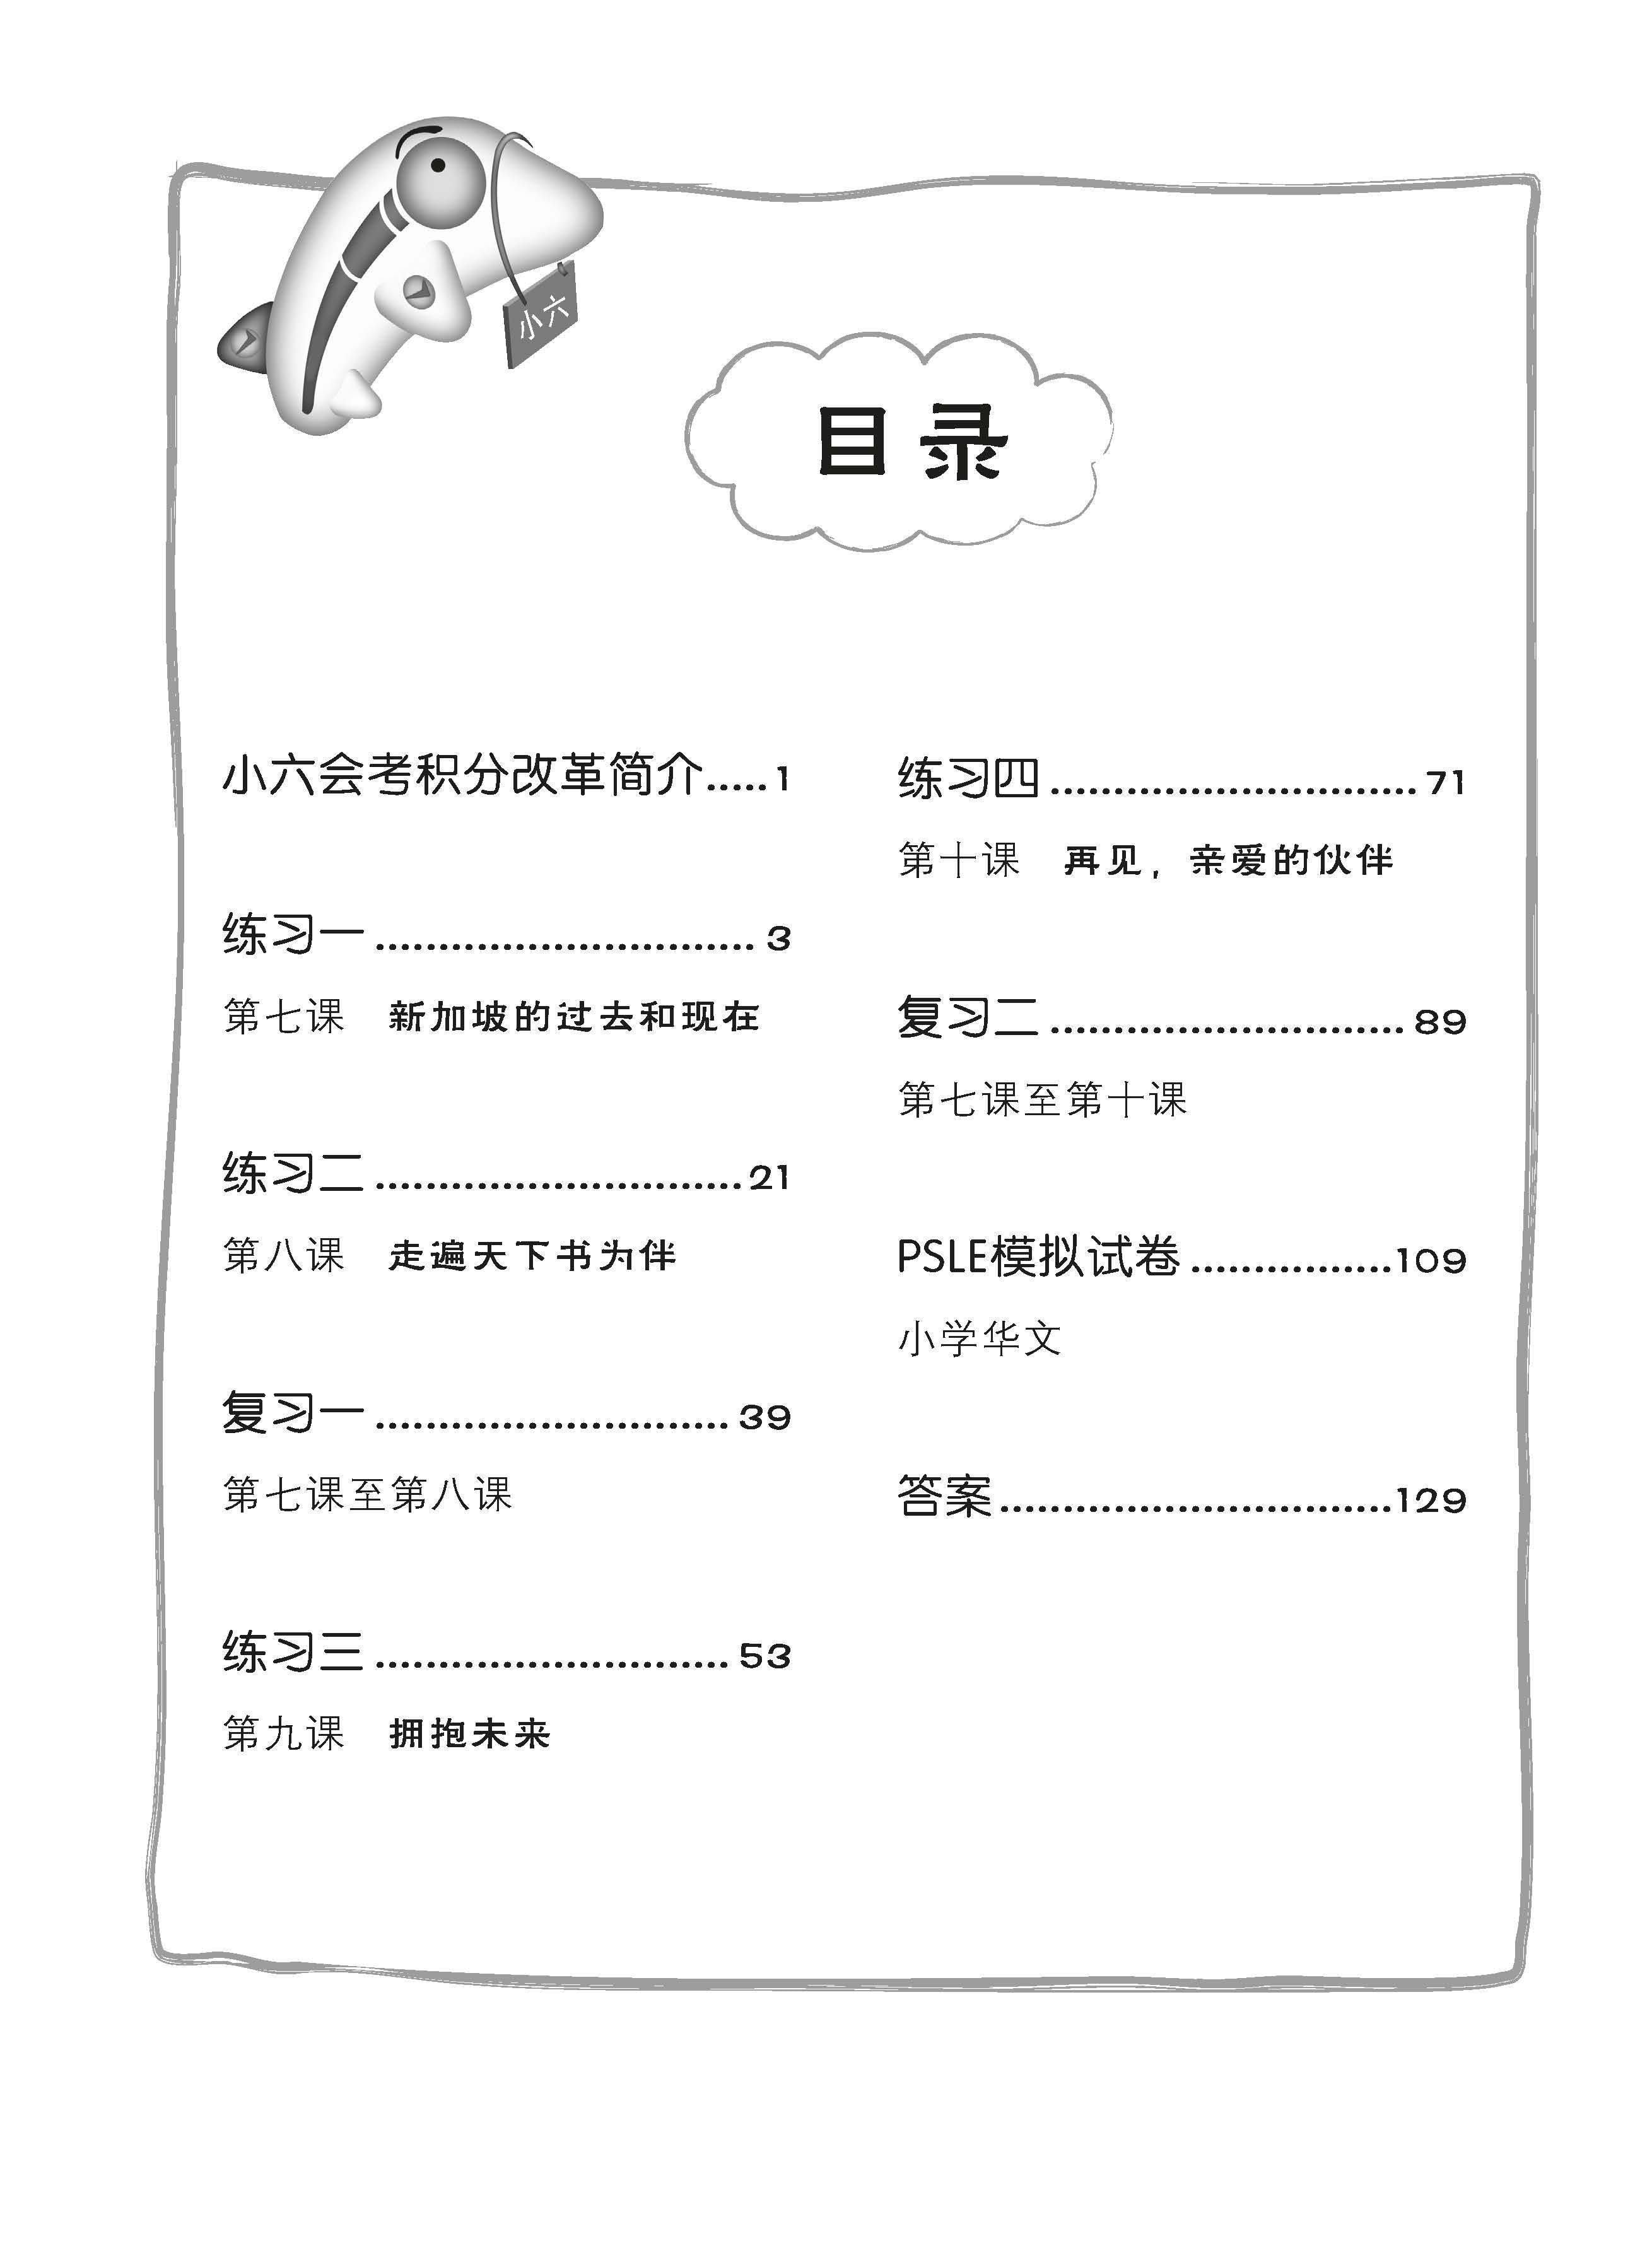 Primary 6B Score In Chinese 华文每课练习 - _MS, CHINESE, EDUCATIONAL PUBLISHING HOUSE, INTERMEDIATE, PRIMARY 6